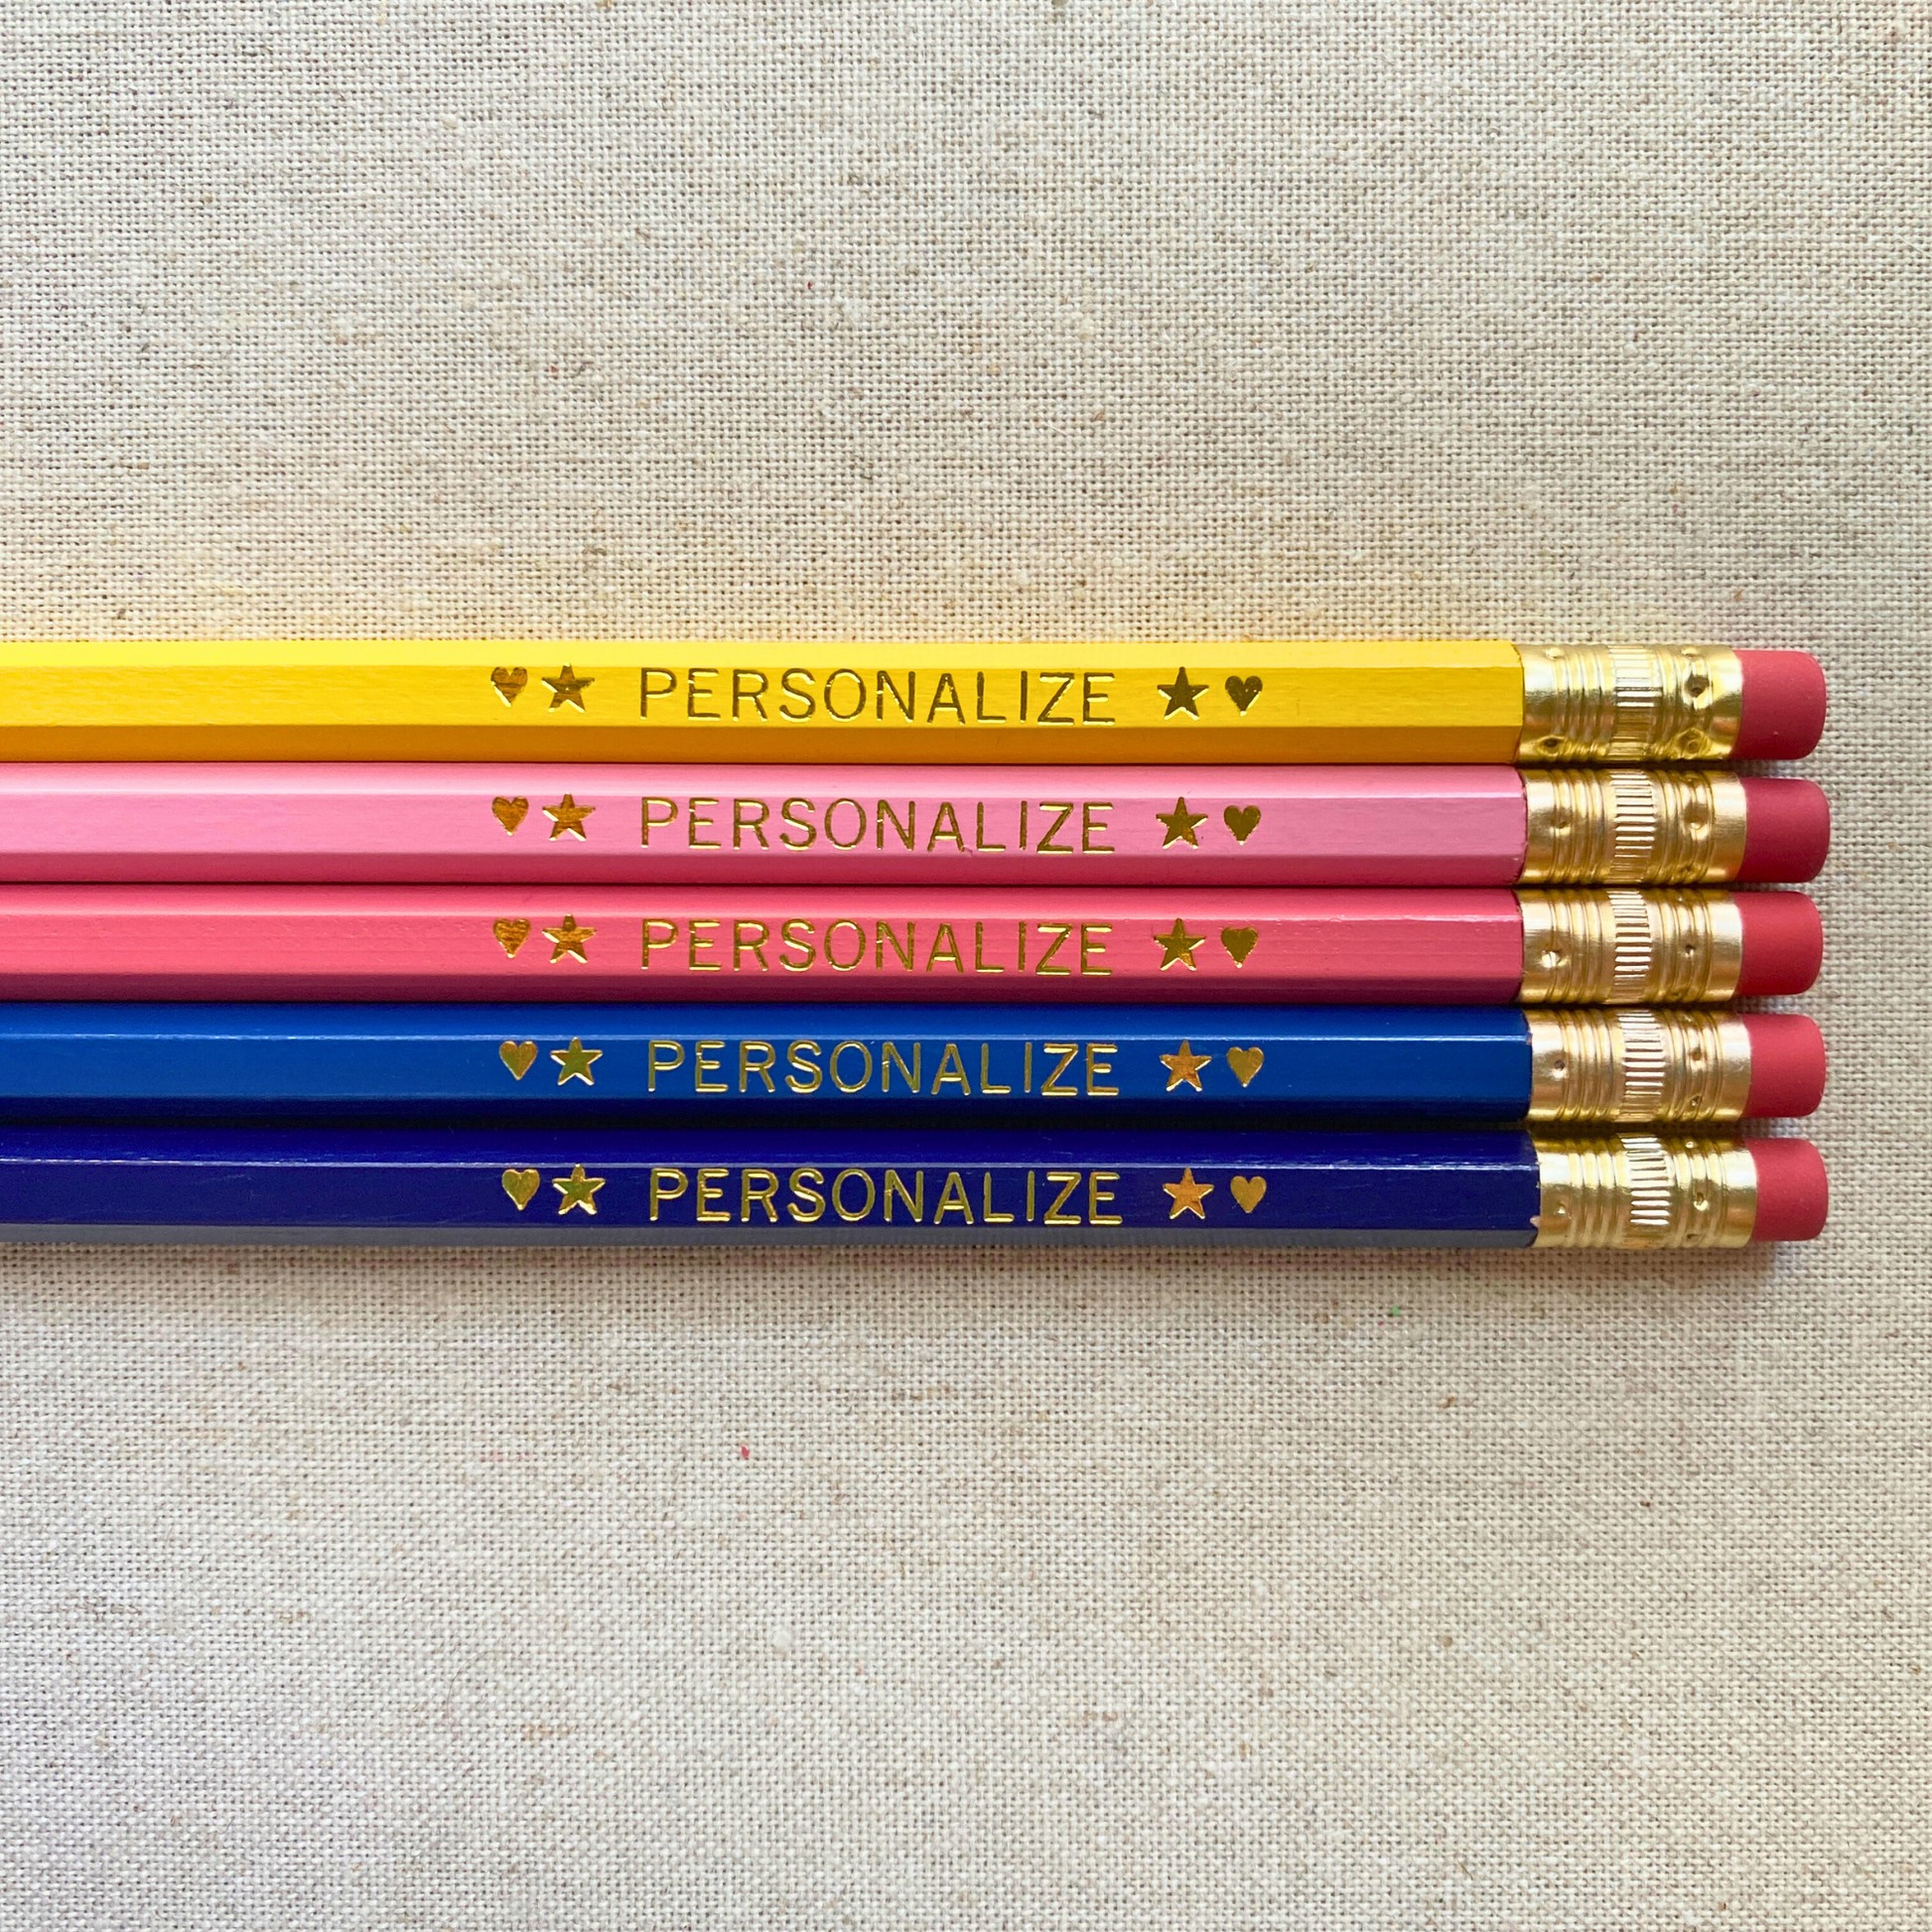 5 Personalized Pencils. Yellow, Pastel Pink, Coral Pink, Royal Blue, Navy Blue. Customize with a name or a phrase.